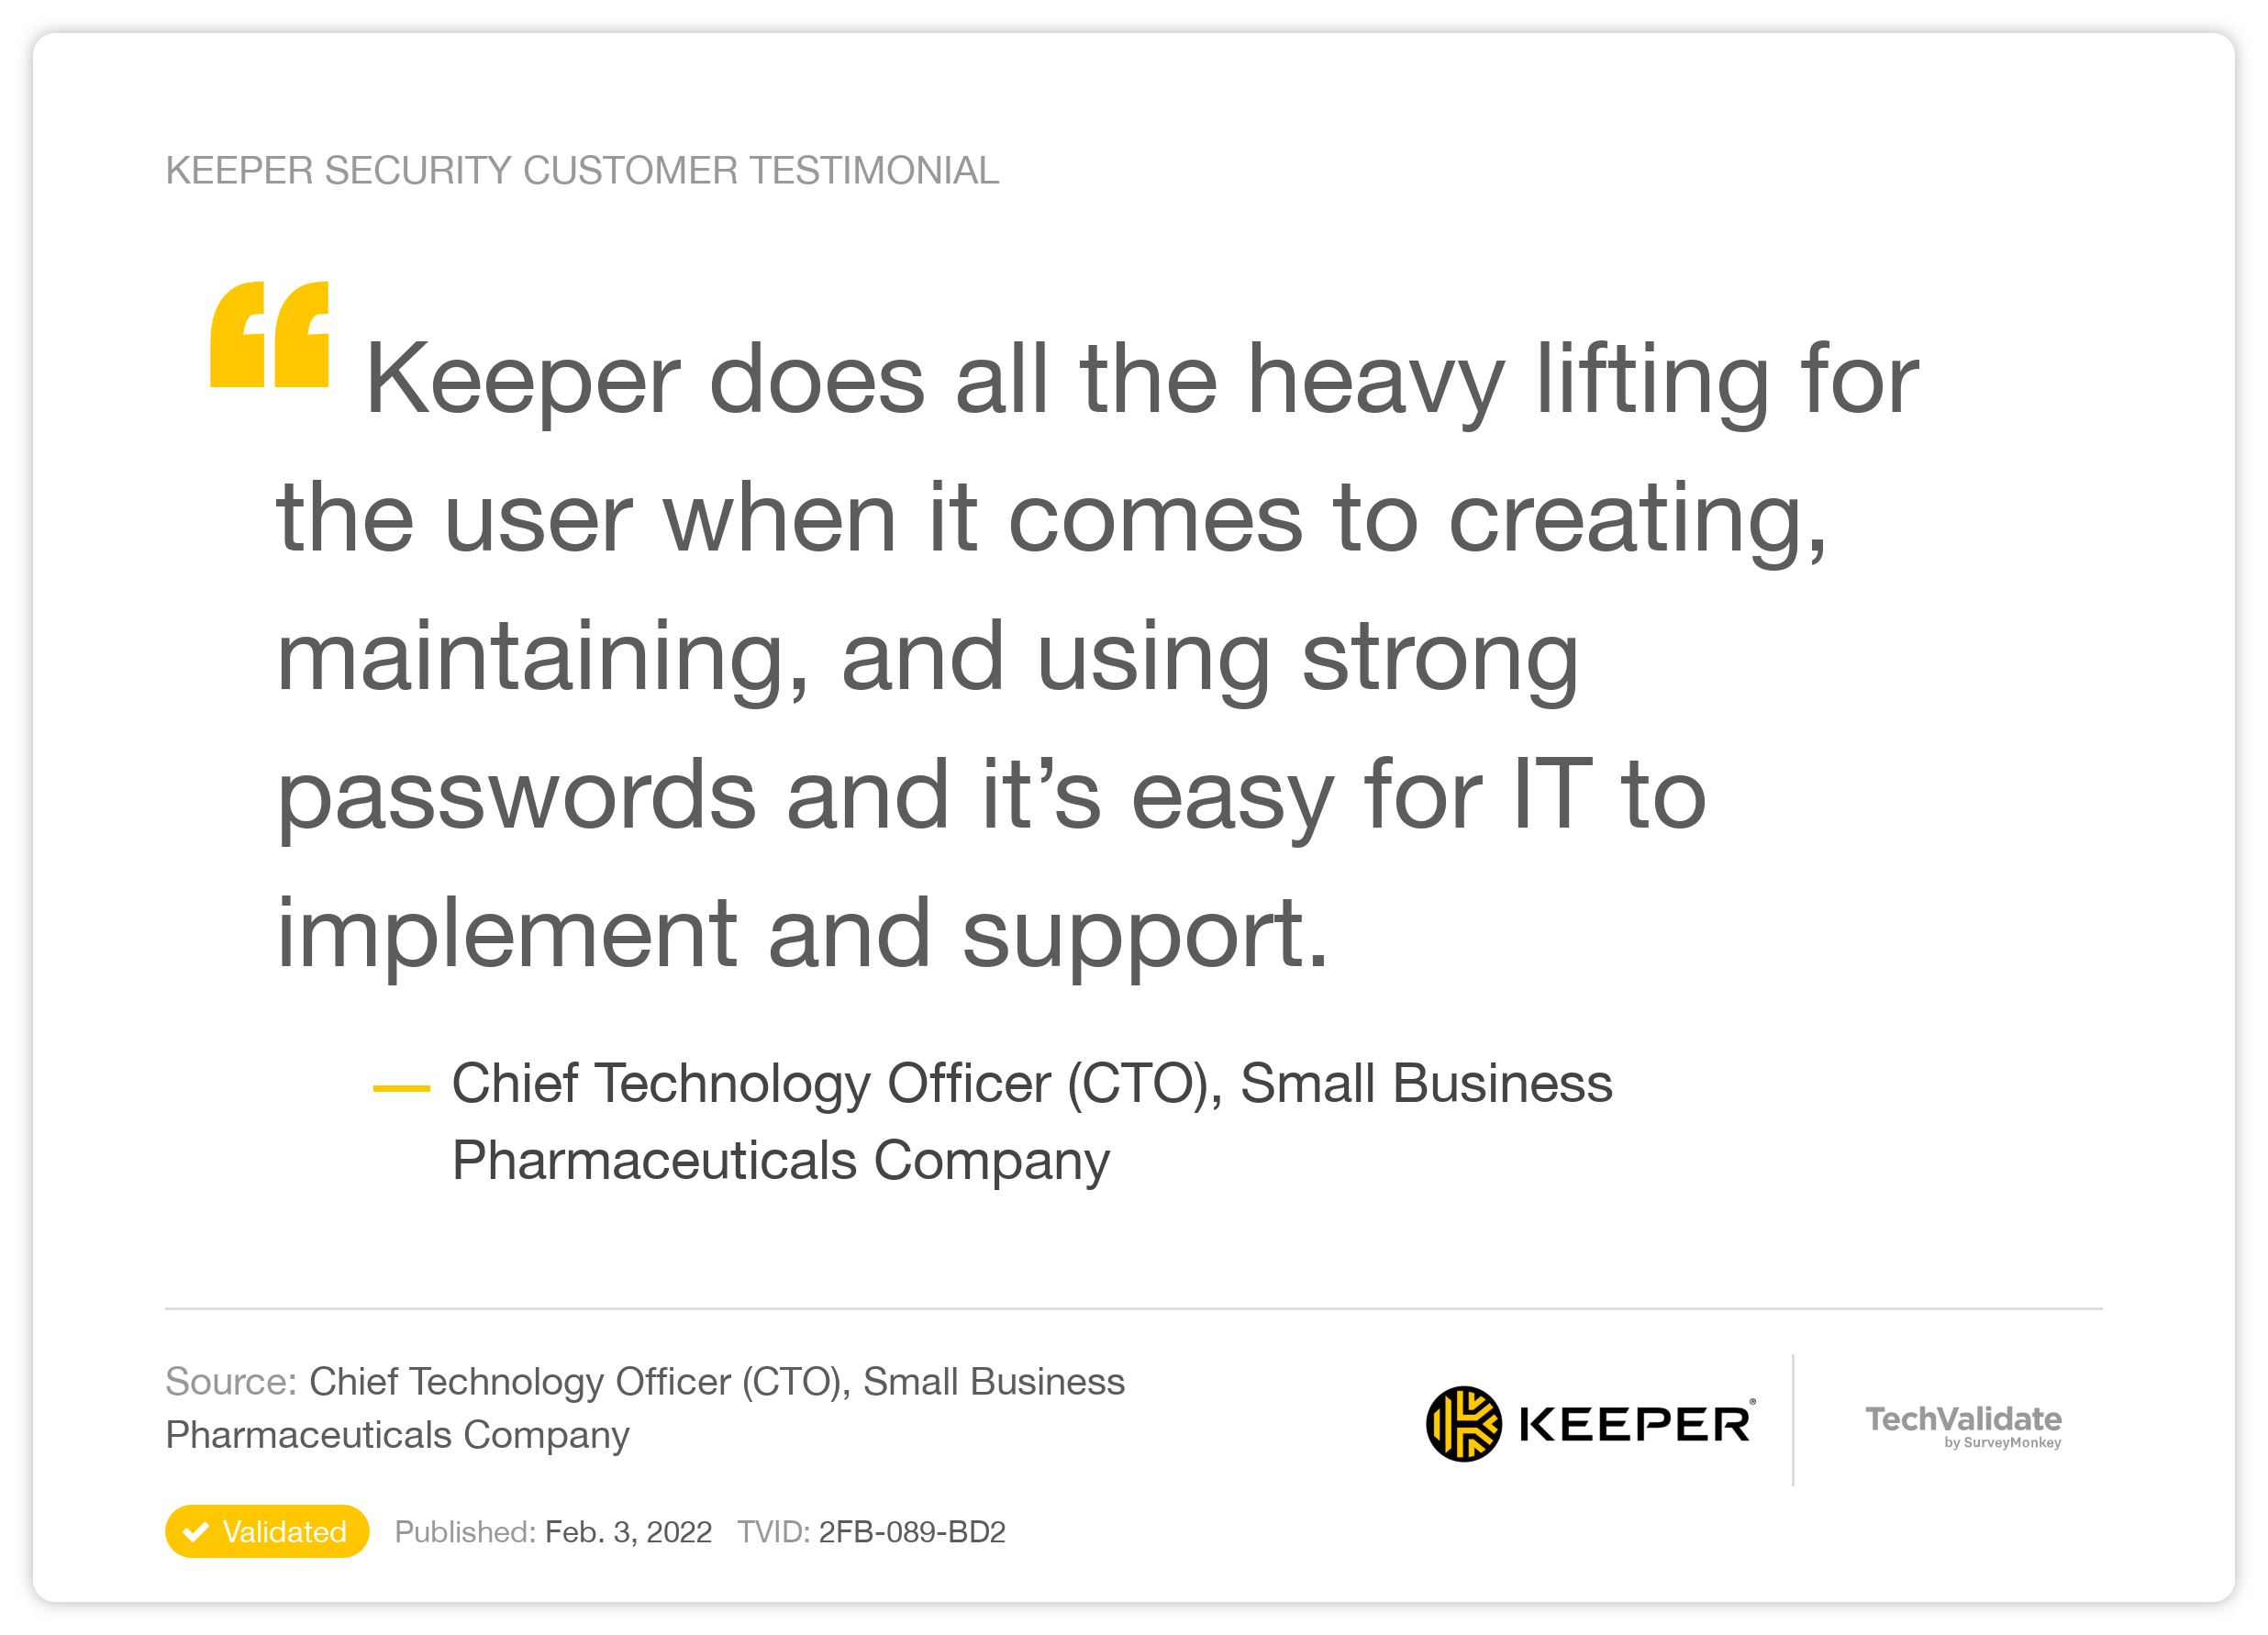 Keeper does all the heavy lifting for the user when it comes to creating, maintaining, and using strong passwords and it’s easy for IT to implement and support.